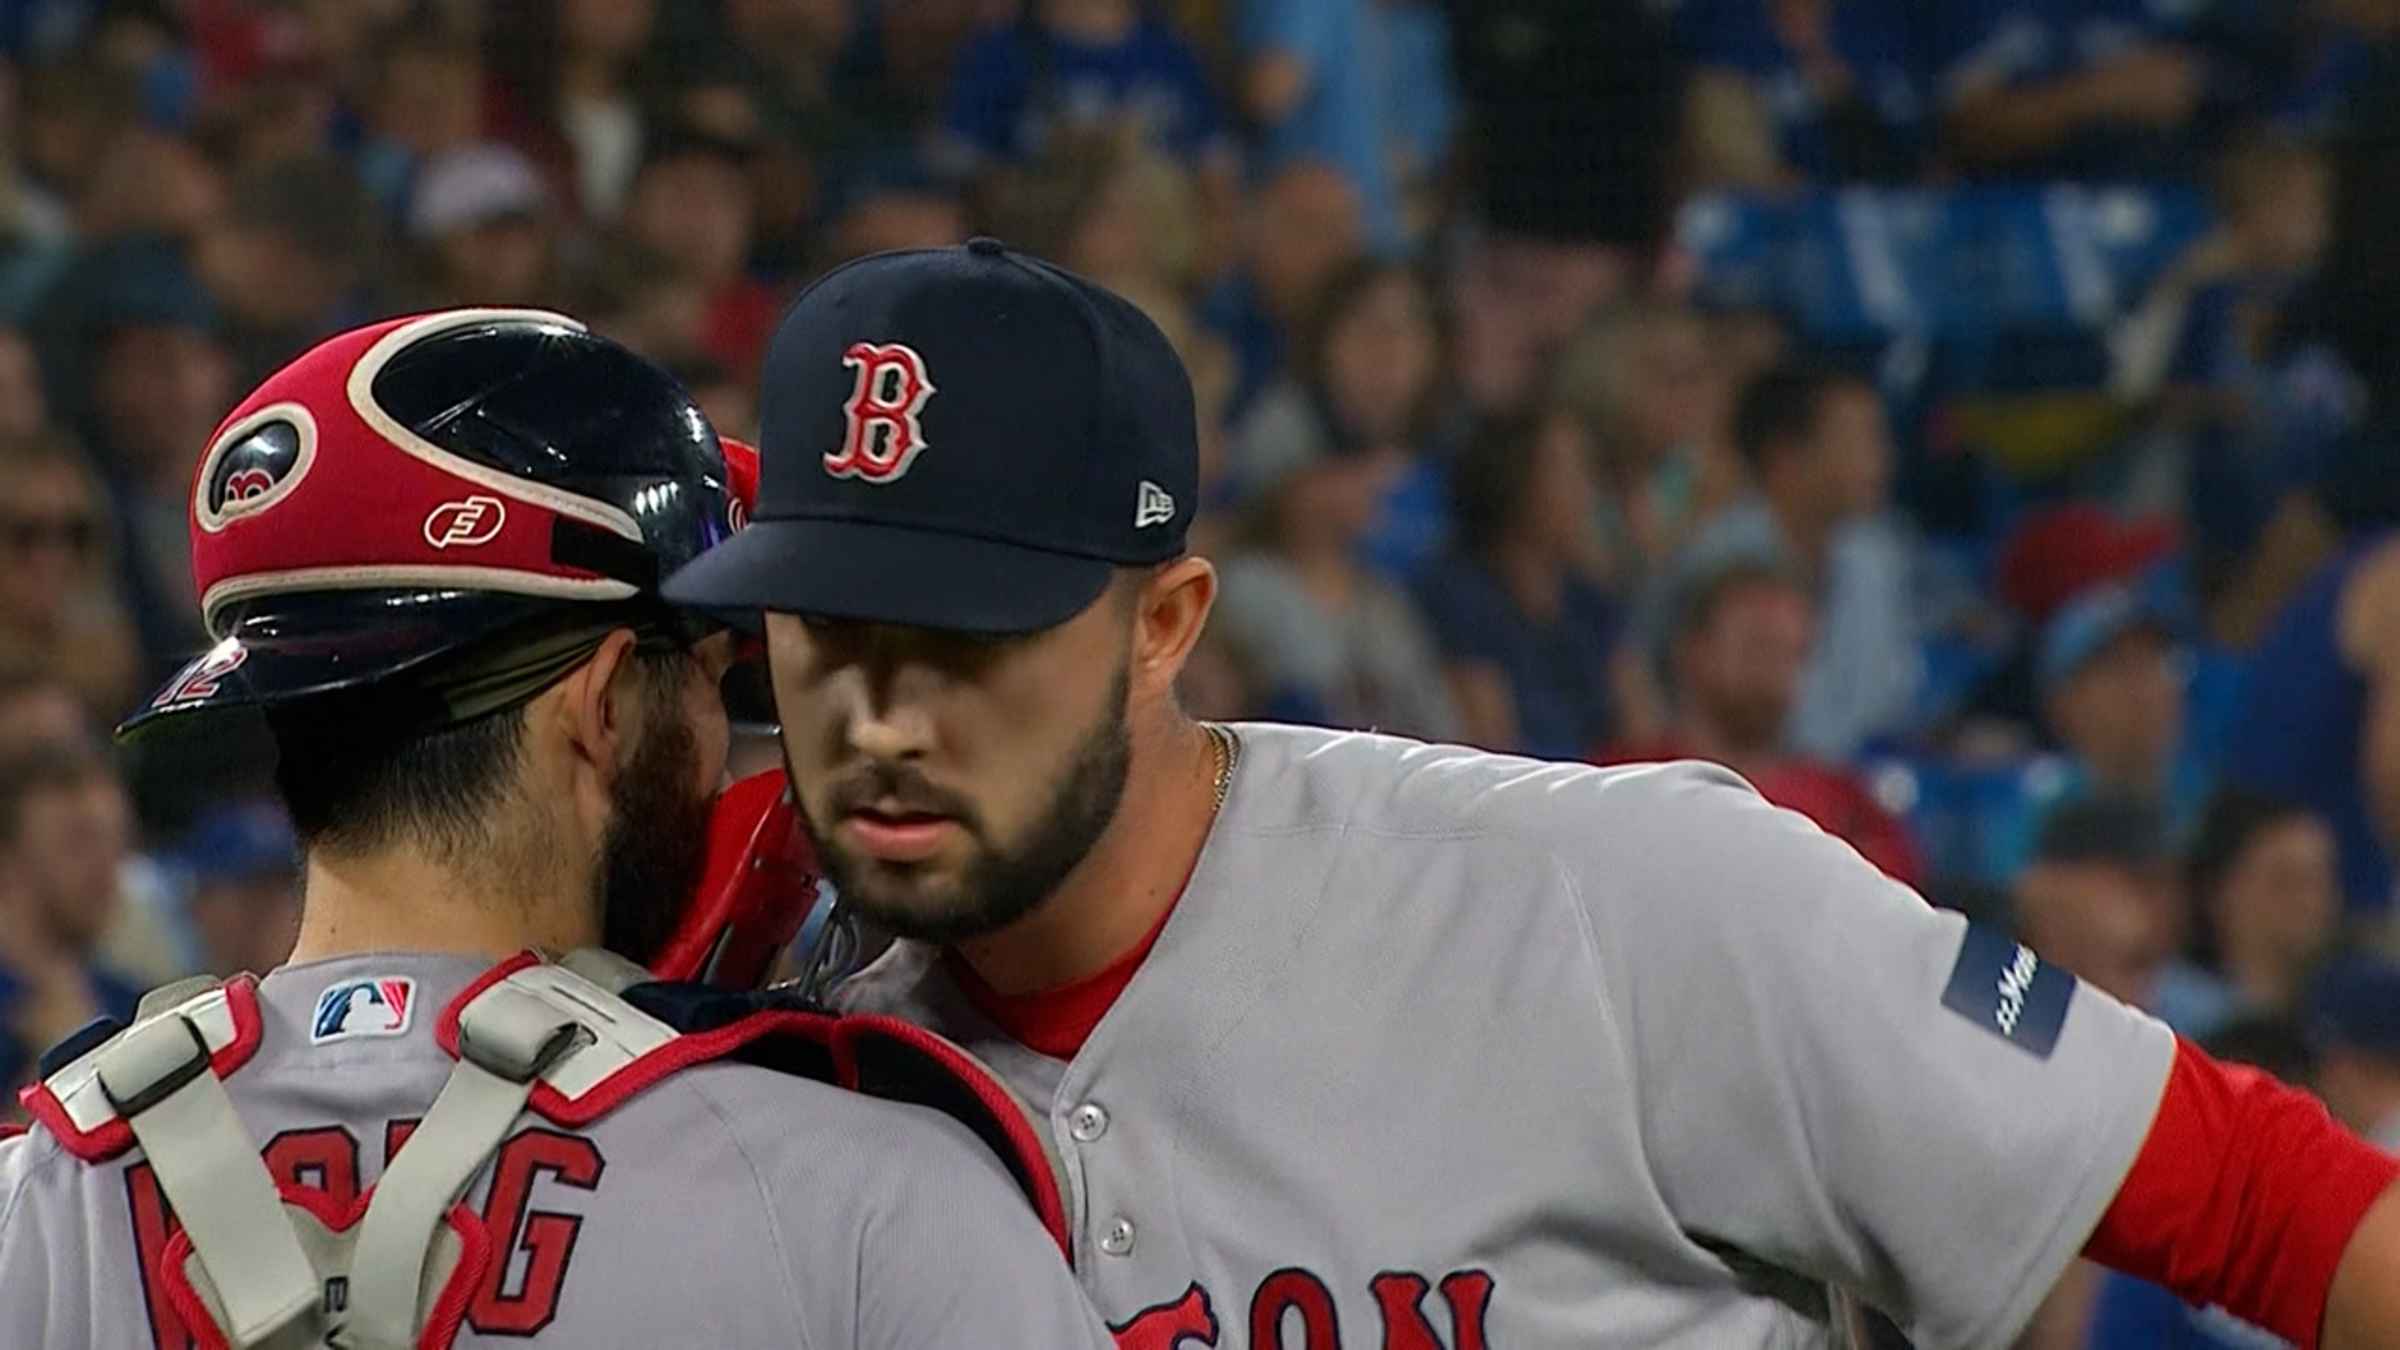 Boston Red Sox pitcher Matt Clement sits on the mound after being